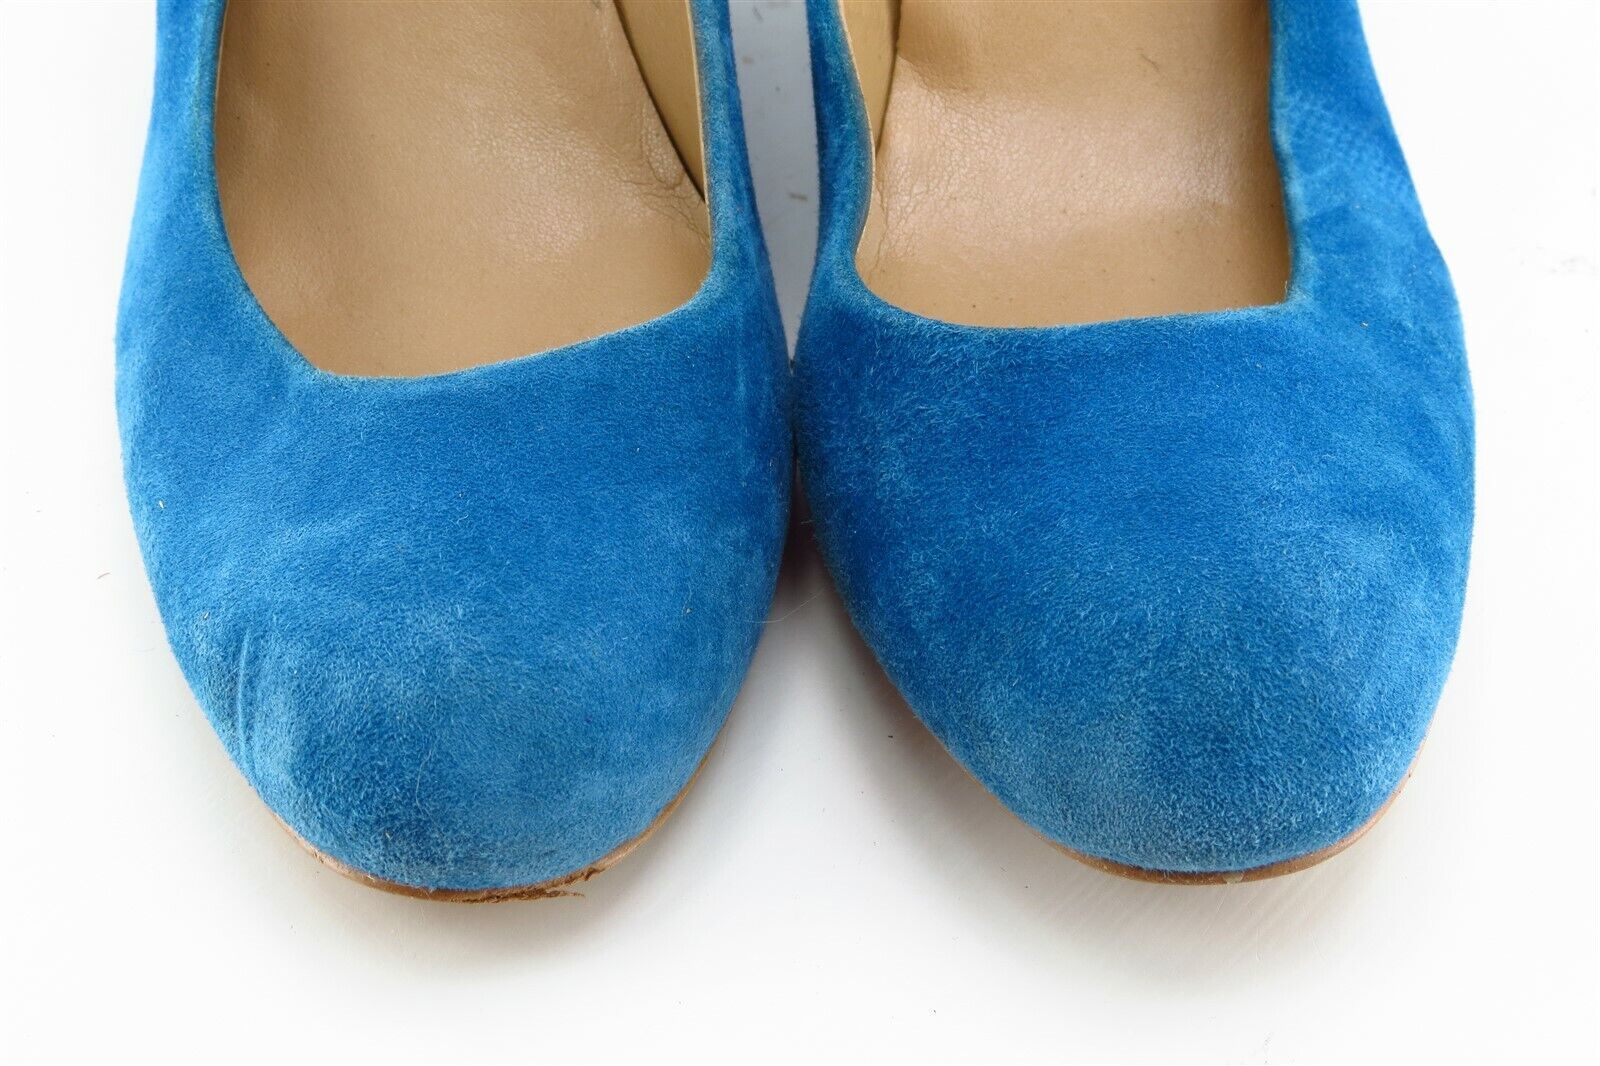 Primary image for Ann Taylor Women Sz 8.5 M Blue Wedge Suede Shoes